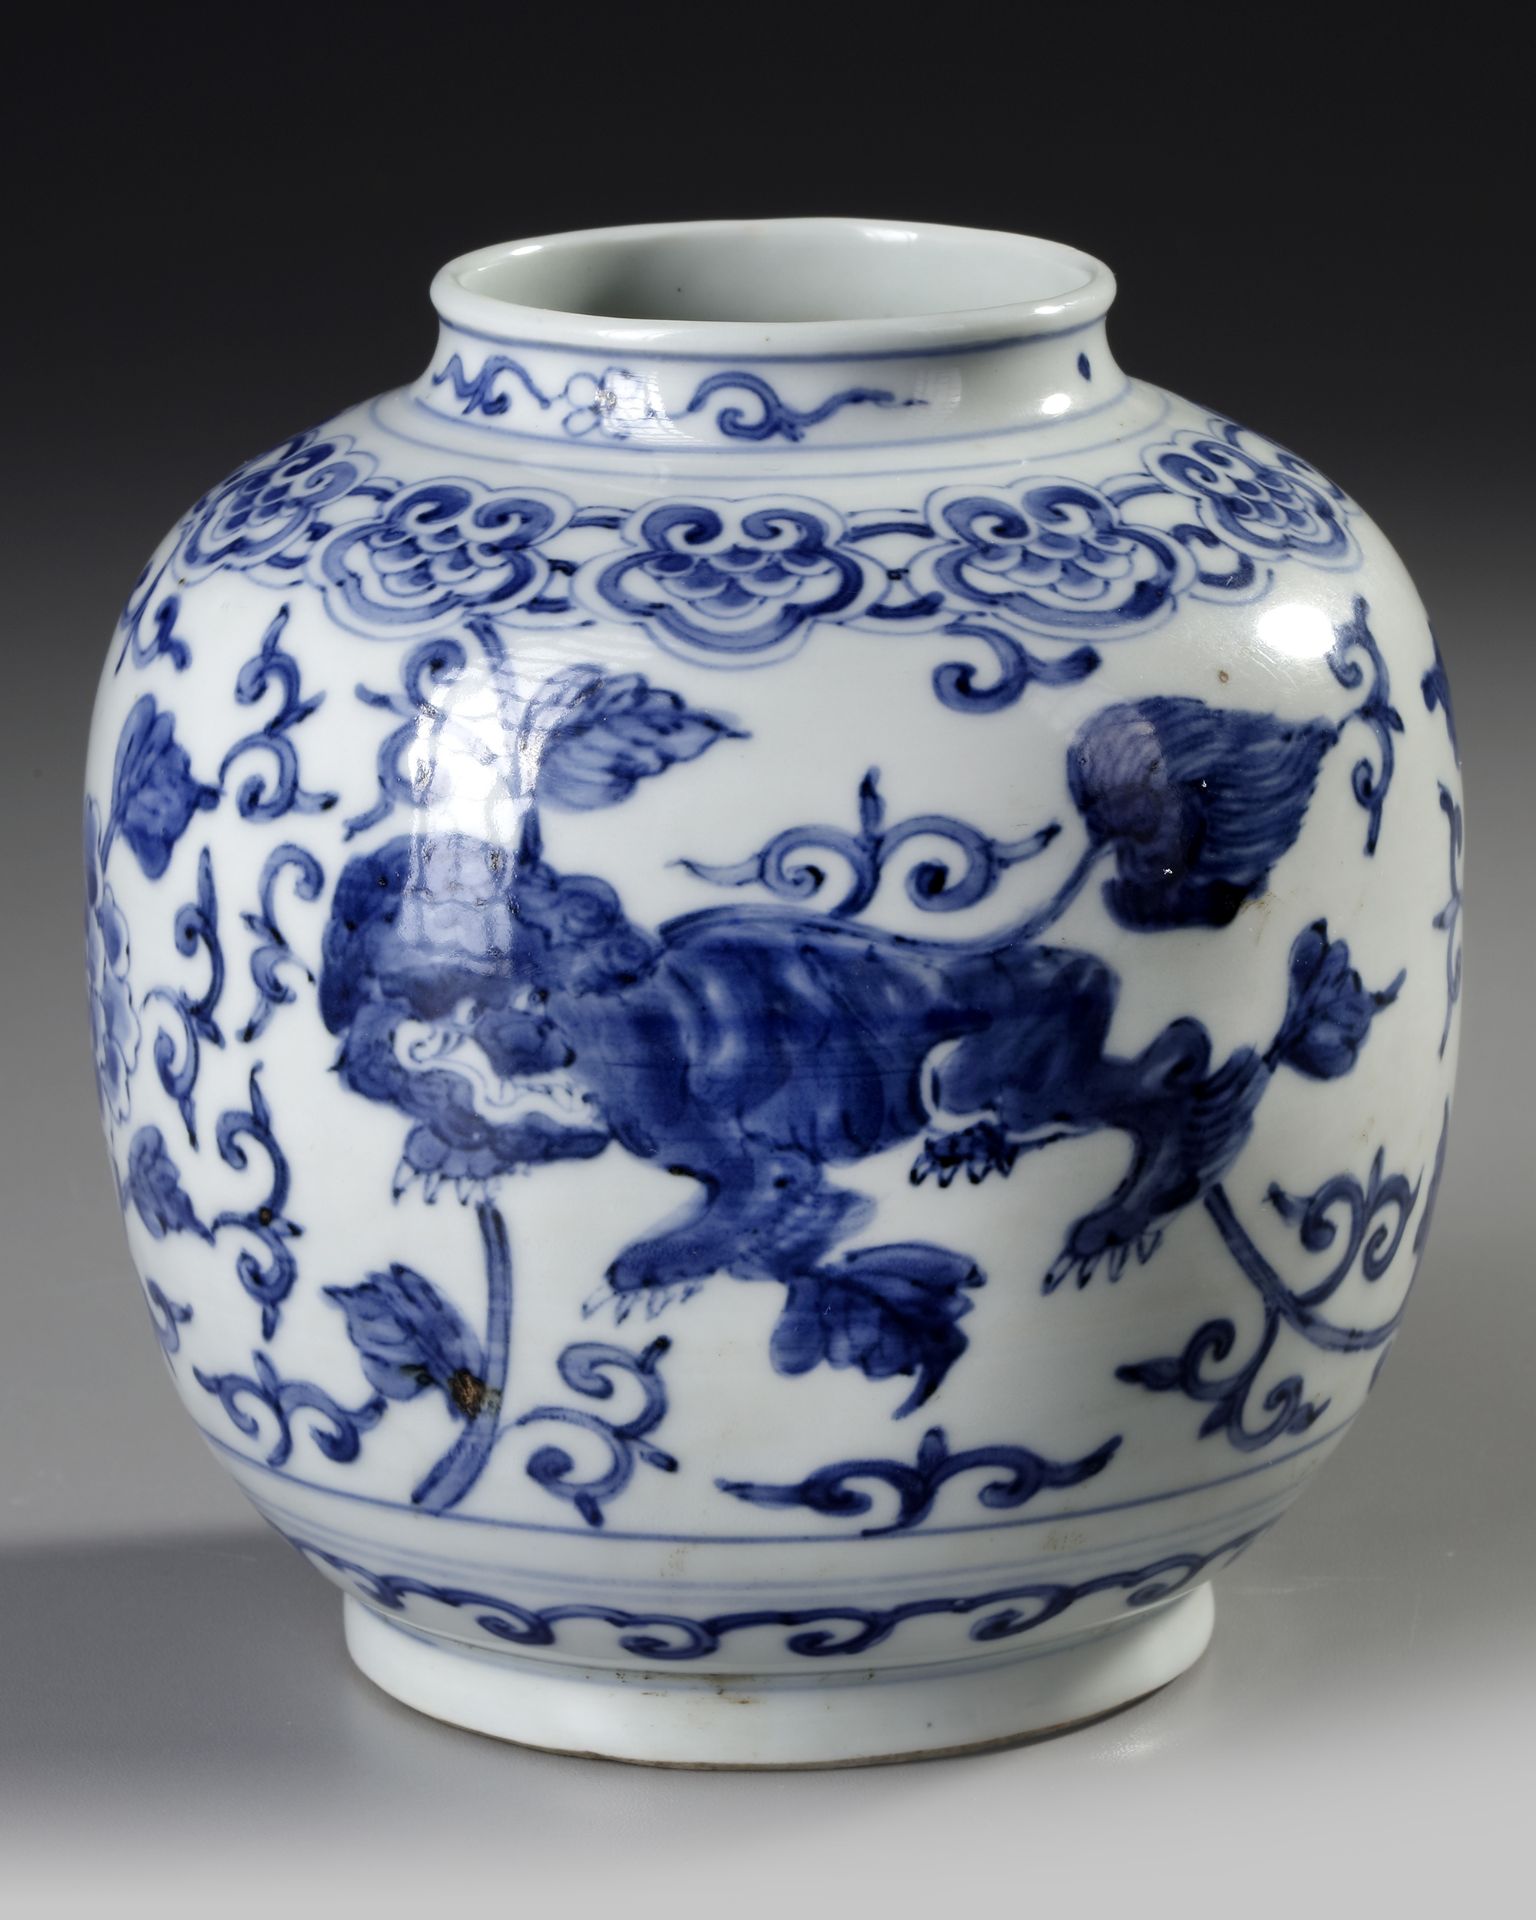 A CHINESE BLUE AND WHITE JAR, MING DYNASTY (1368-1644) OR LATER - Image 4 of 10